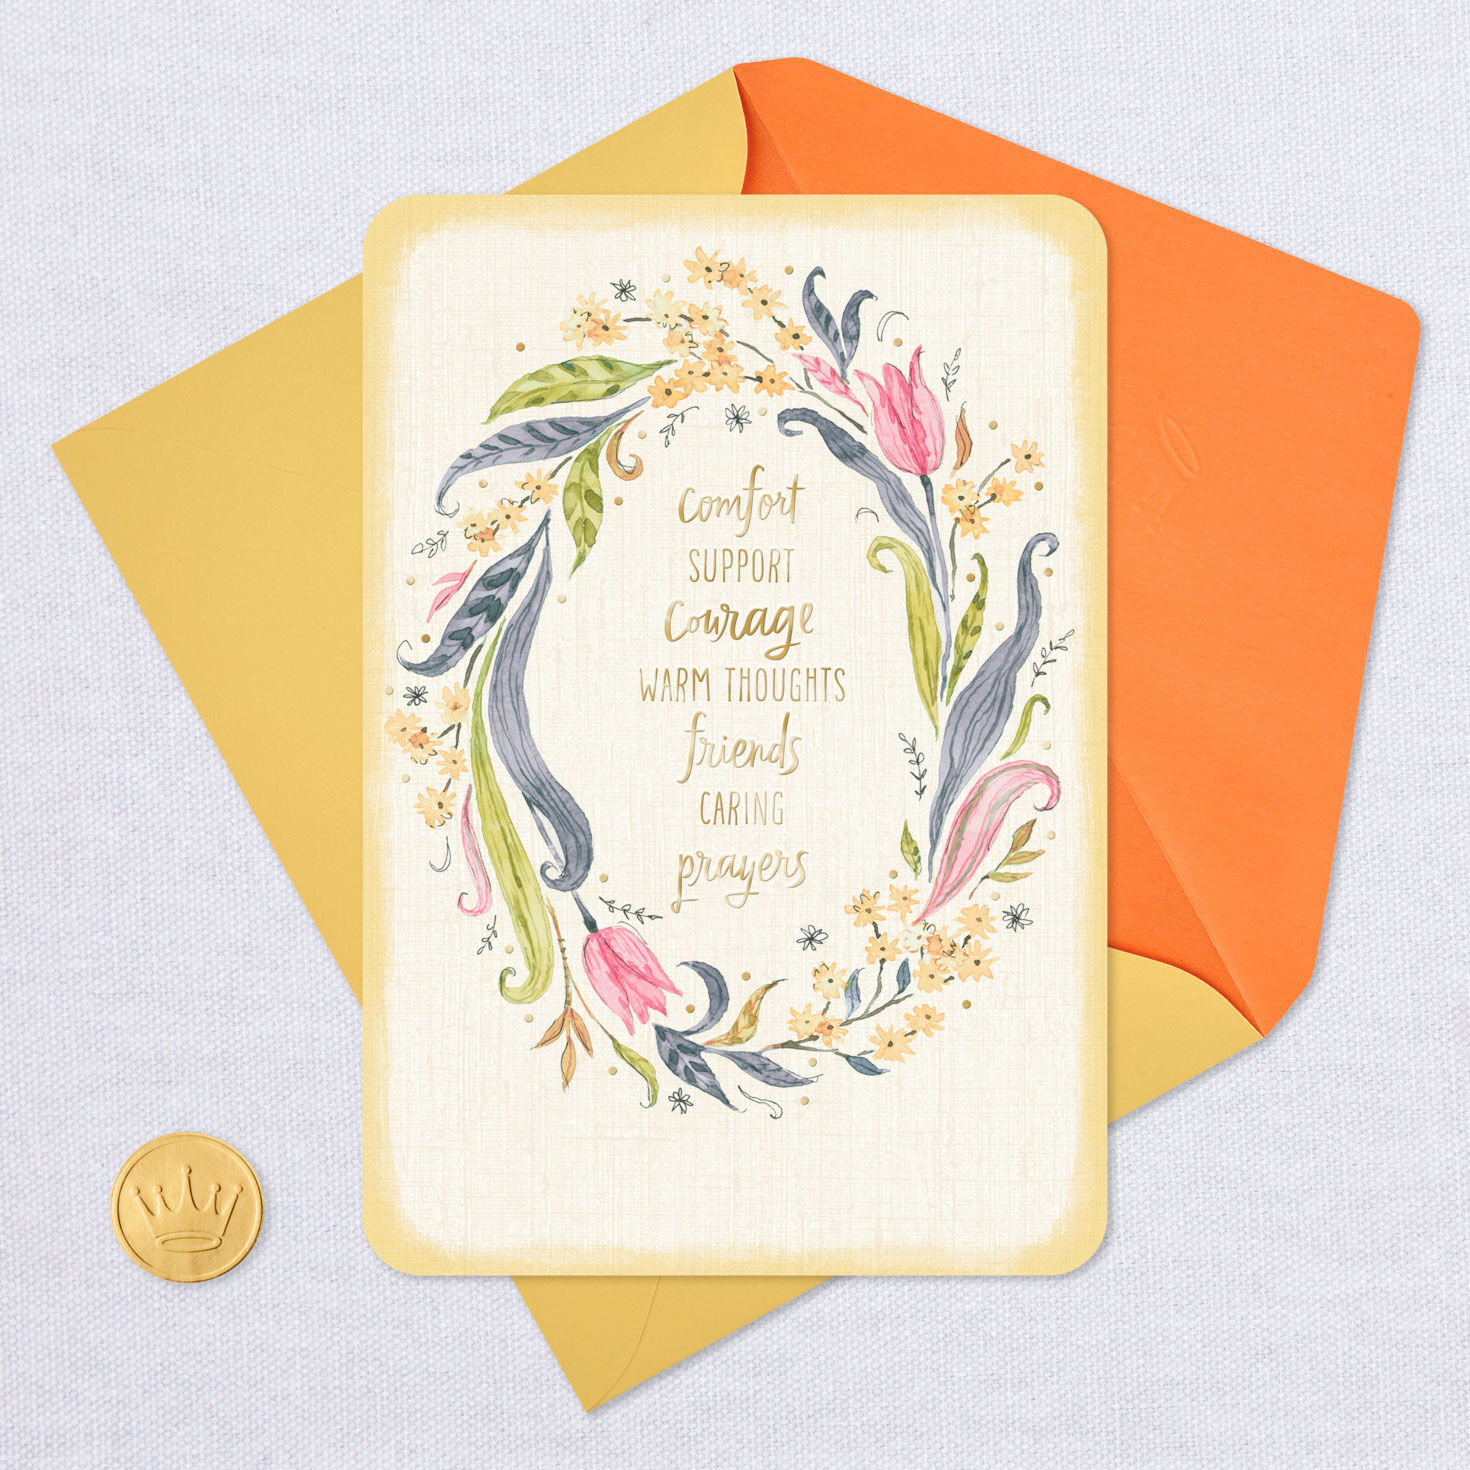 Comfort, Support, Courage Floral Wreath Get Well Card for only USD 2.99 | Hallmark